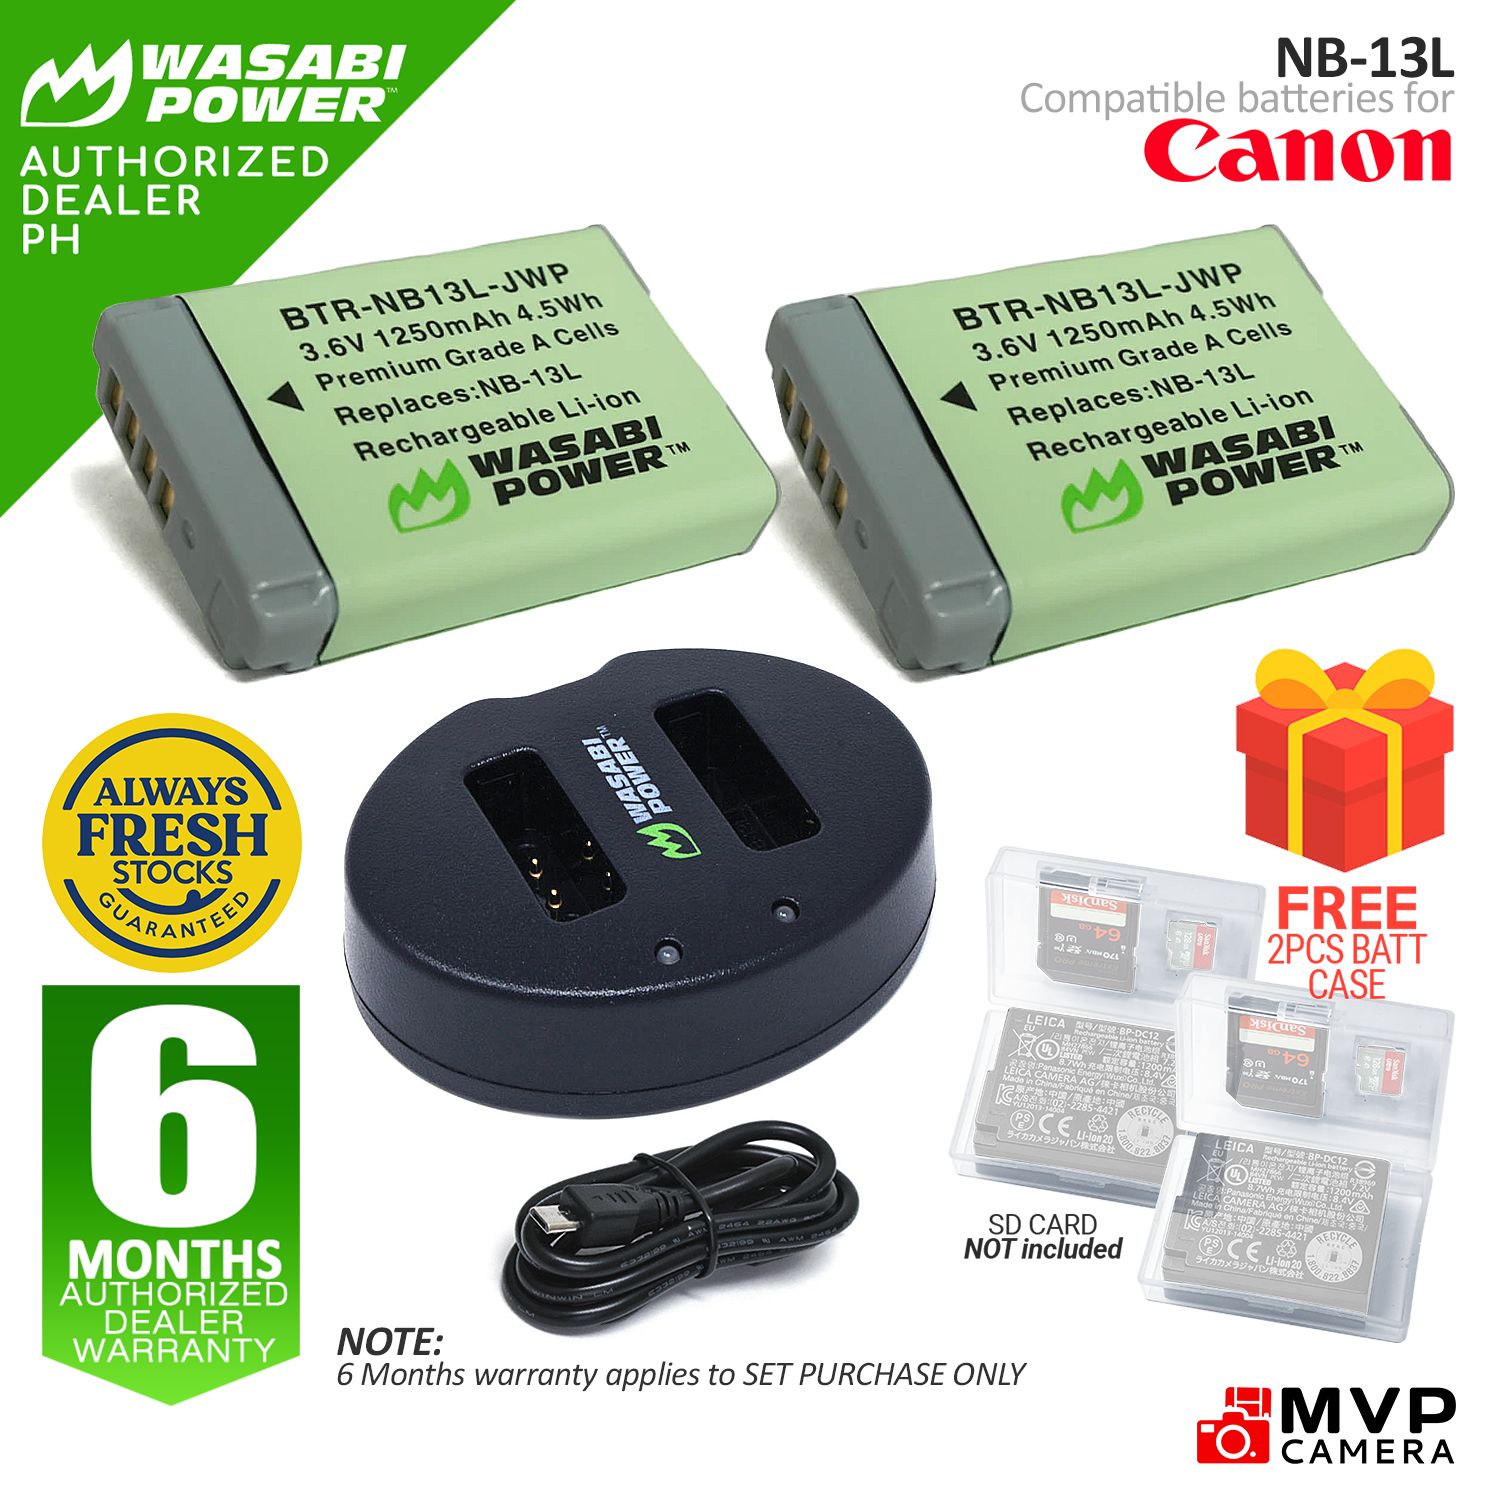 PowerShot G1 X Mark III SX720 HS G5 X G5 X Mark II Wasabi Power Battery SX620 HS Dual Charger for Canon NB-13L SX730 HS G7 X Mark III G9 X 2-Pack G9 X Mark II G7 X Mark II G7 X SX740 HS 